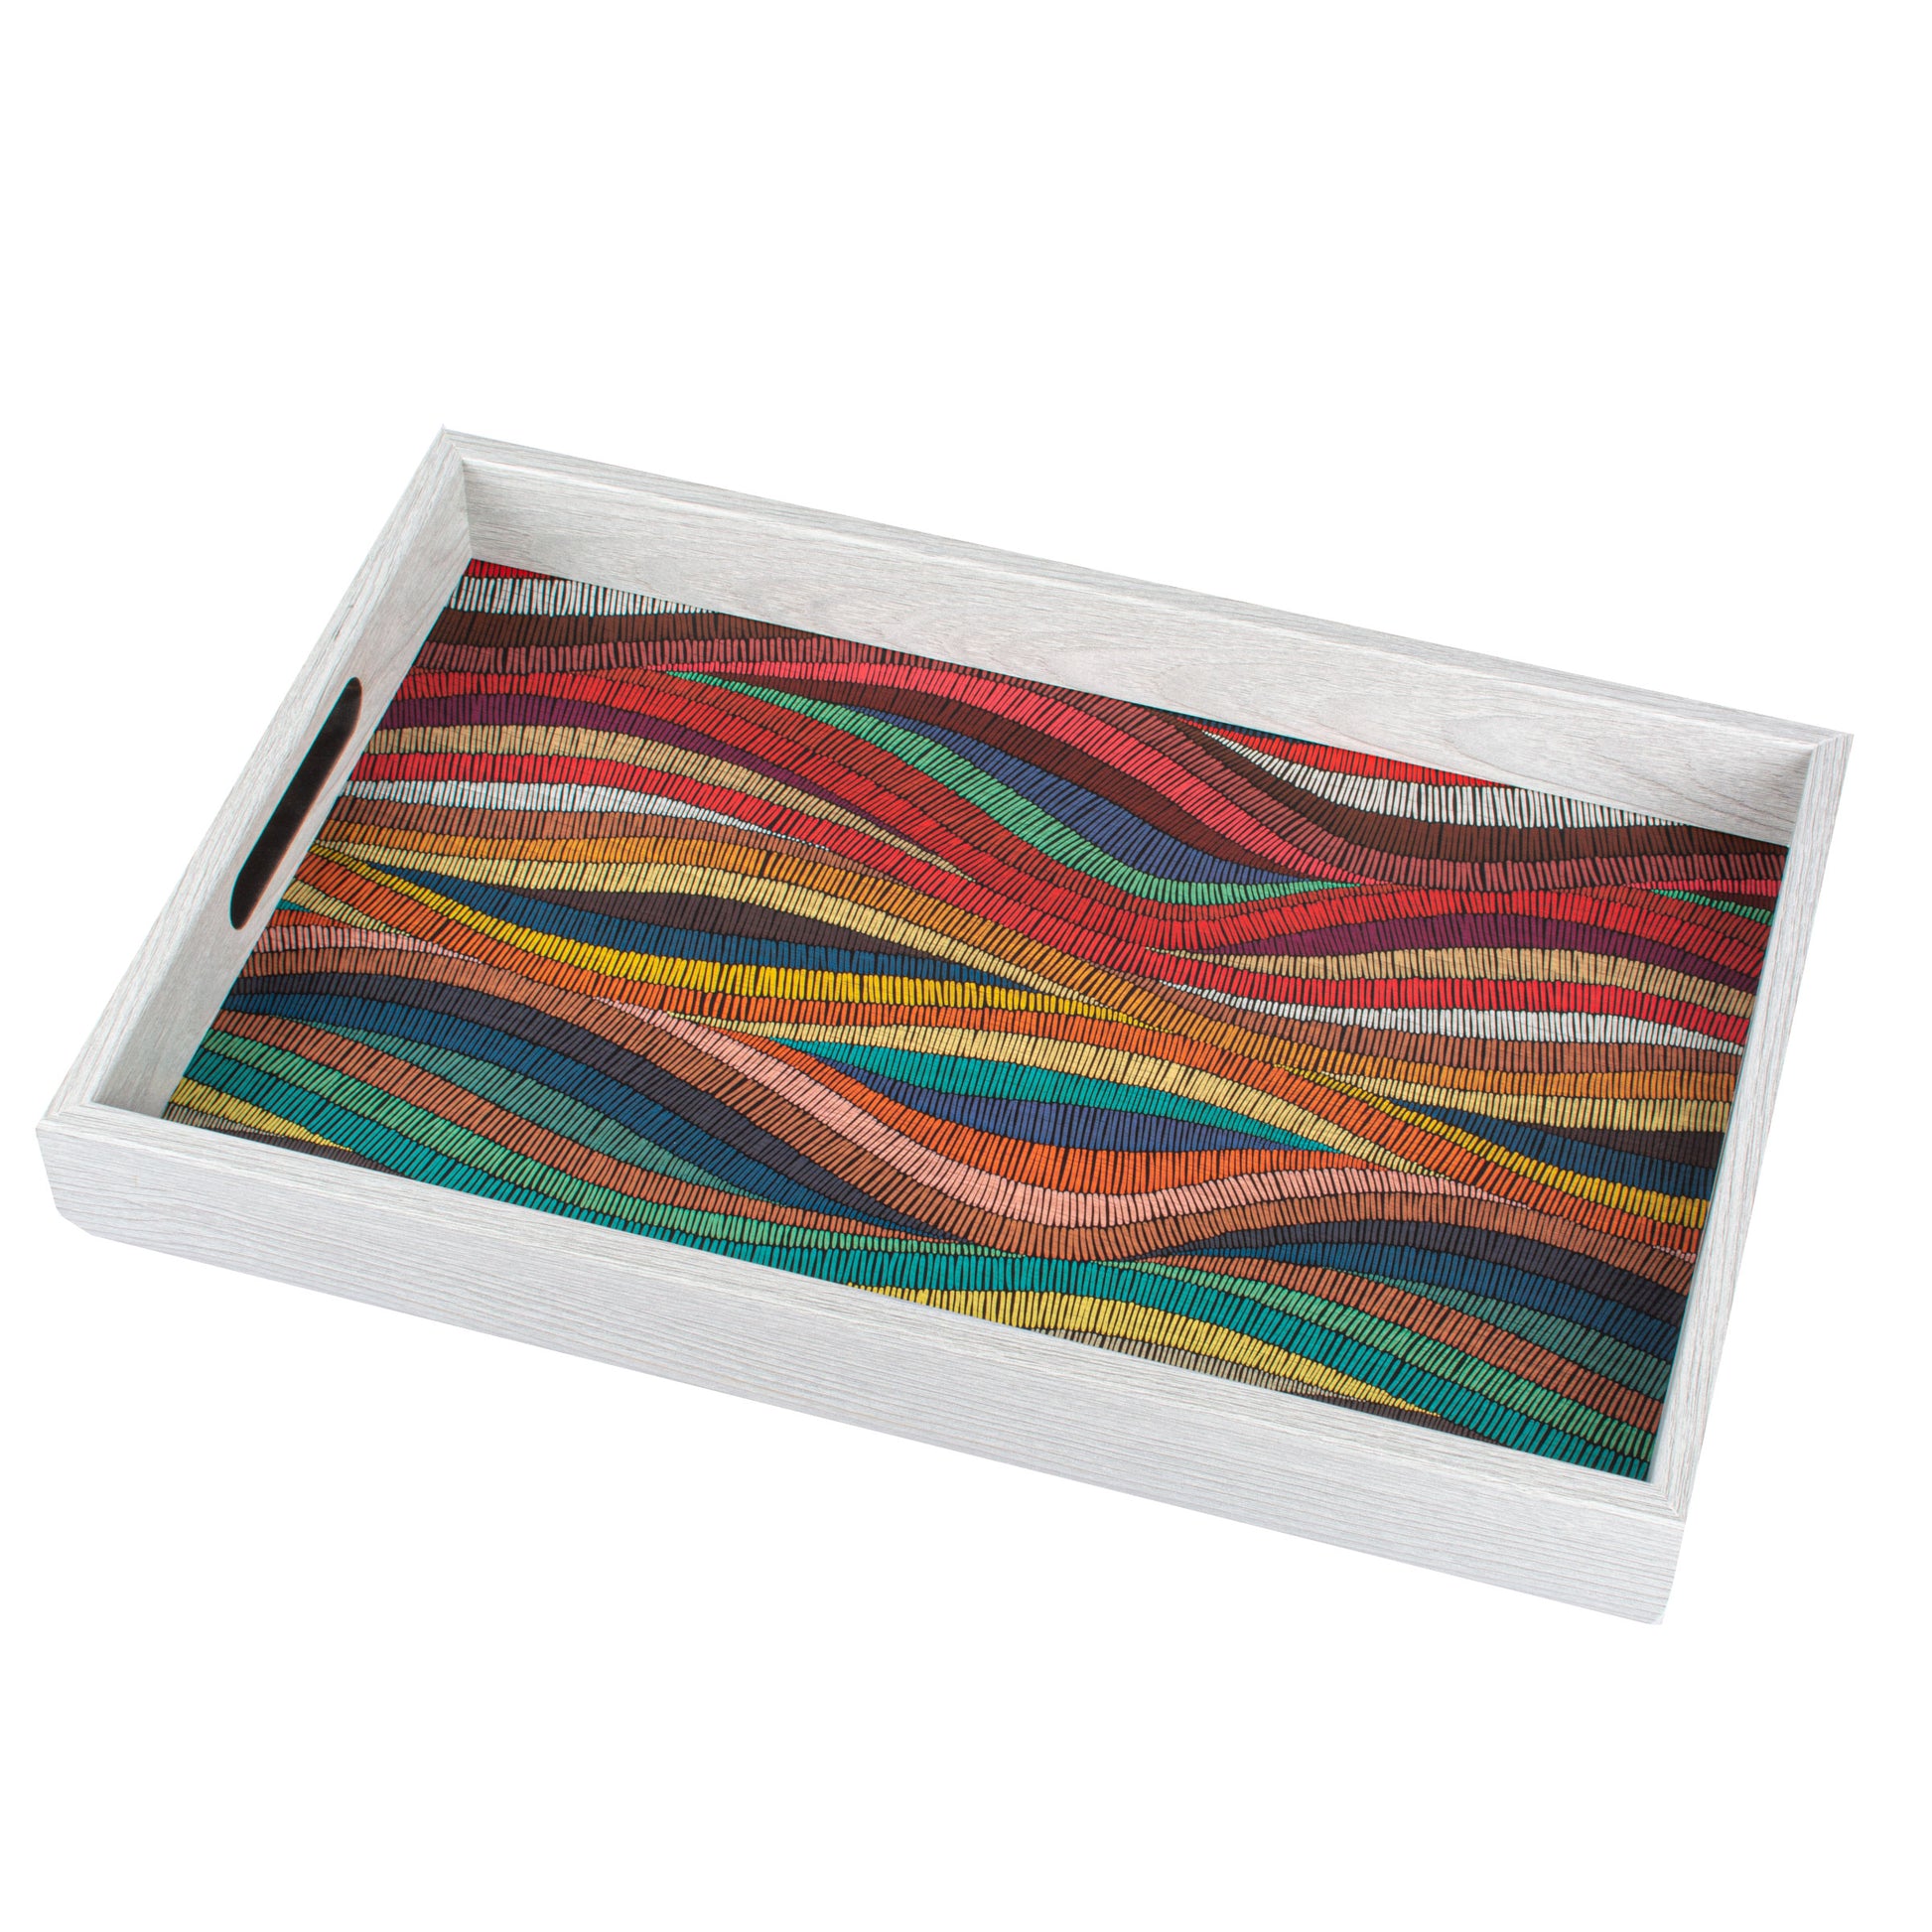 Artistic Wooden Tray with Colorful Waves Printed Design - Luxury Game Room Decor - Premium Decorative Objects from MANOPOULOS Chess & Backgammon - Just €25! Shop now at MANOPOULOS Chess & Backgammon